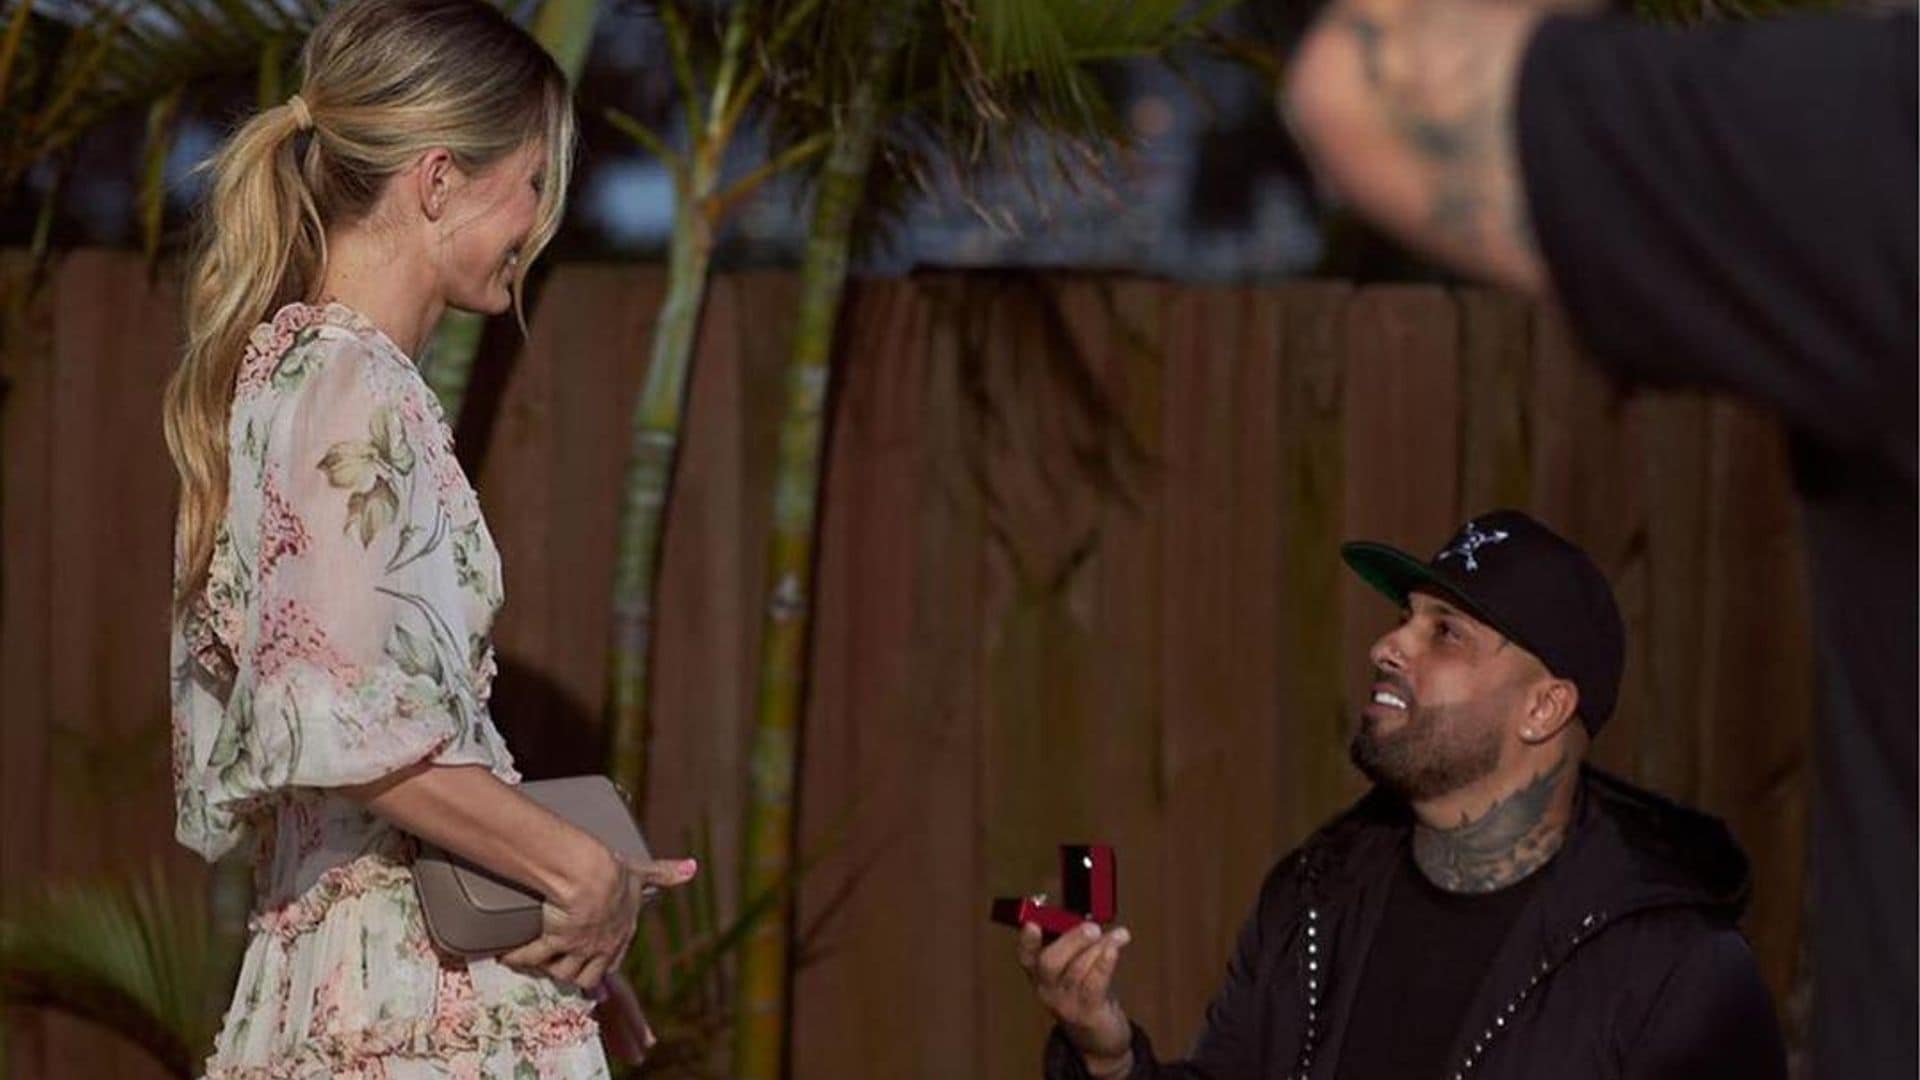 Nicky Jam proposes to girlfriend on Valentine’s Day: See the heart-melting video